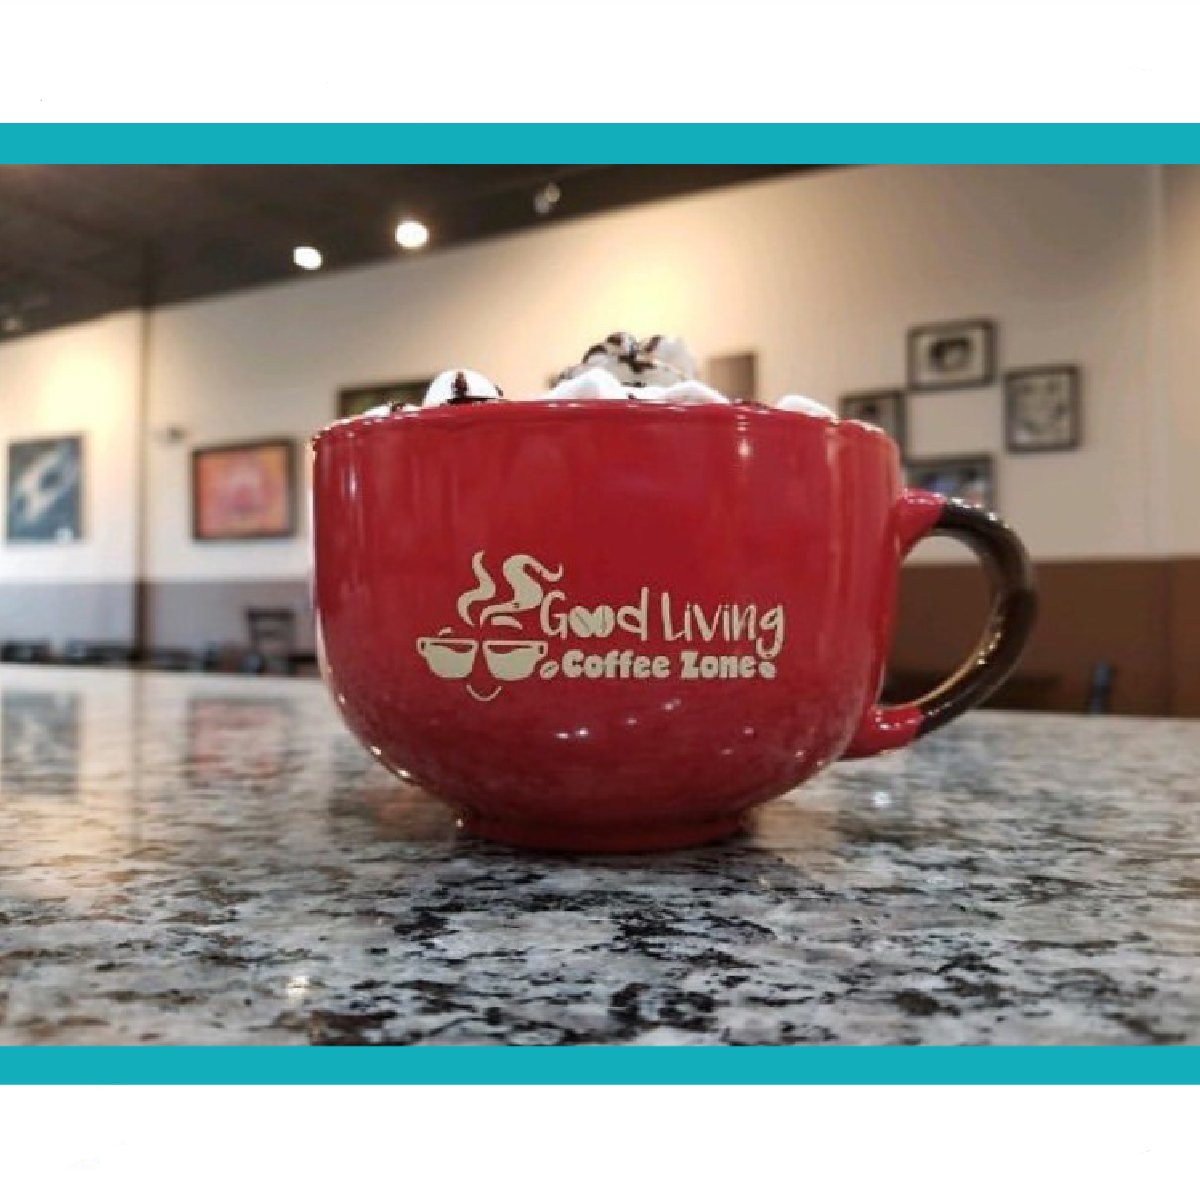 Satisfaction comes from knowing our hard work makes a difference. Thank you @GLCoffeeZone for choosing DiscountMugs! #ceramiccoffeemugs #customceramicmugs #customcoffeemugs #bowlmugs #personalizedmugs #promotionalmugs #printedmugs #custommugs #discountmugs bit.ly/2QNn9bf